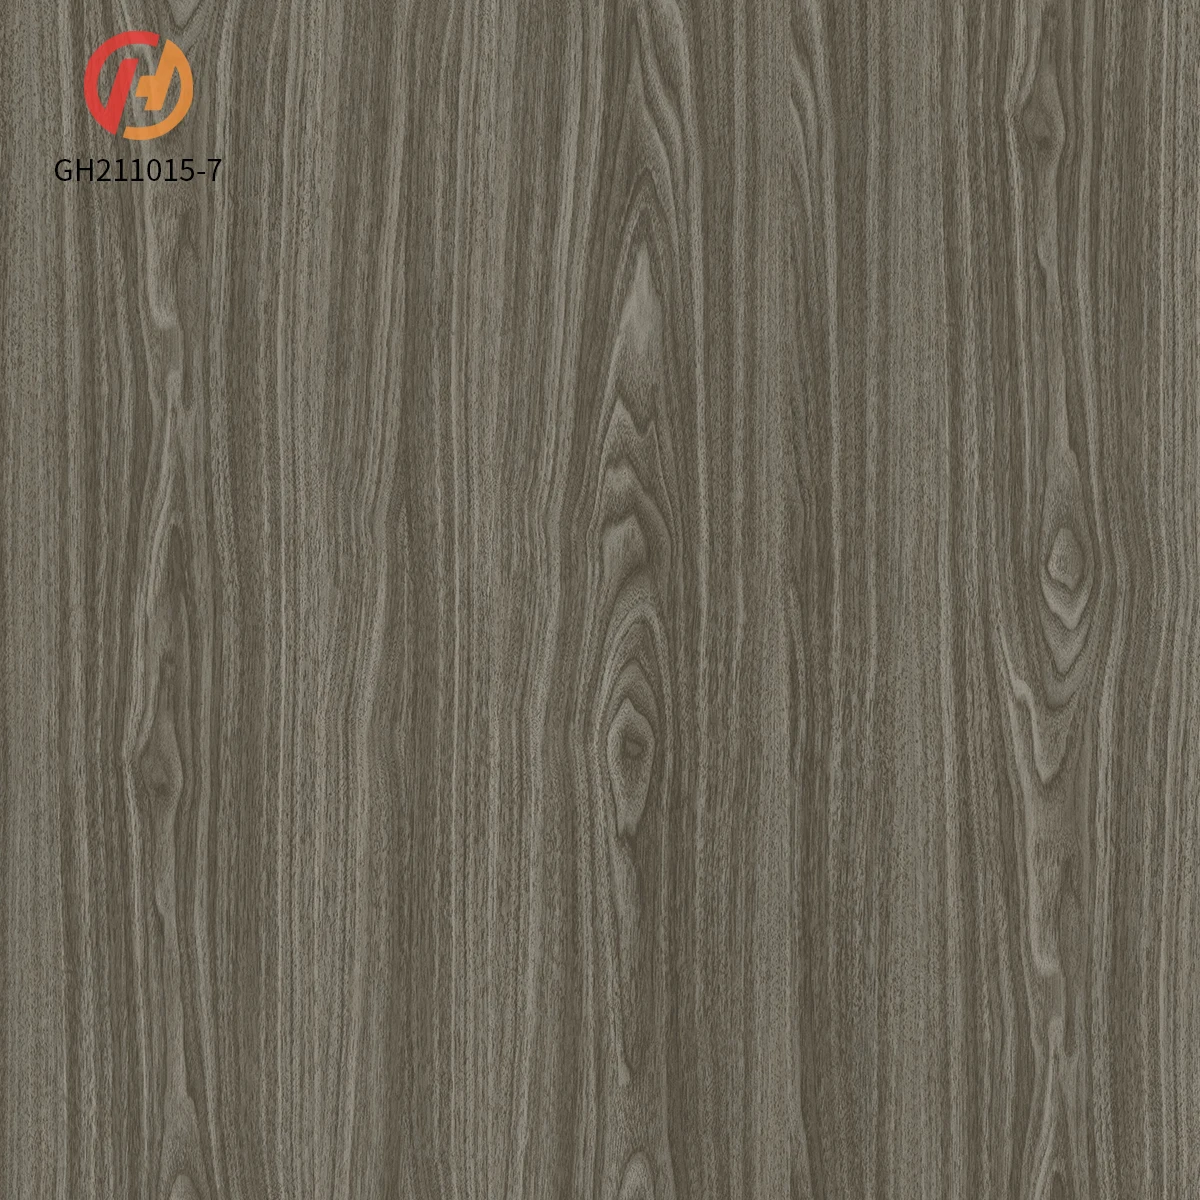 Sample link for SPC flooring/ WPC/ Wallpaper/ PVC /LVT sticker and any kinds of Samples only